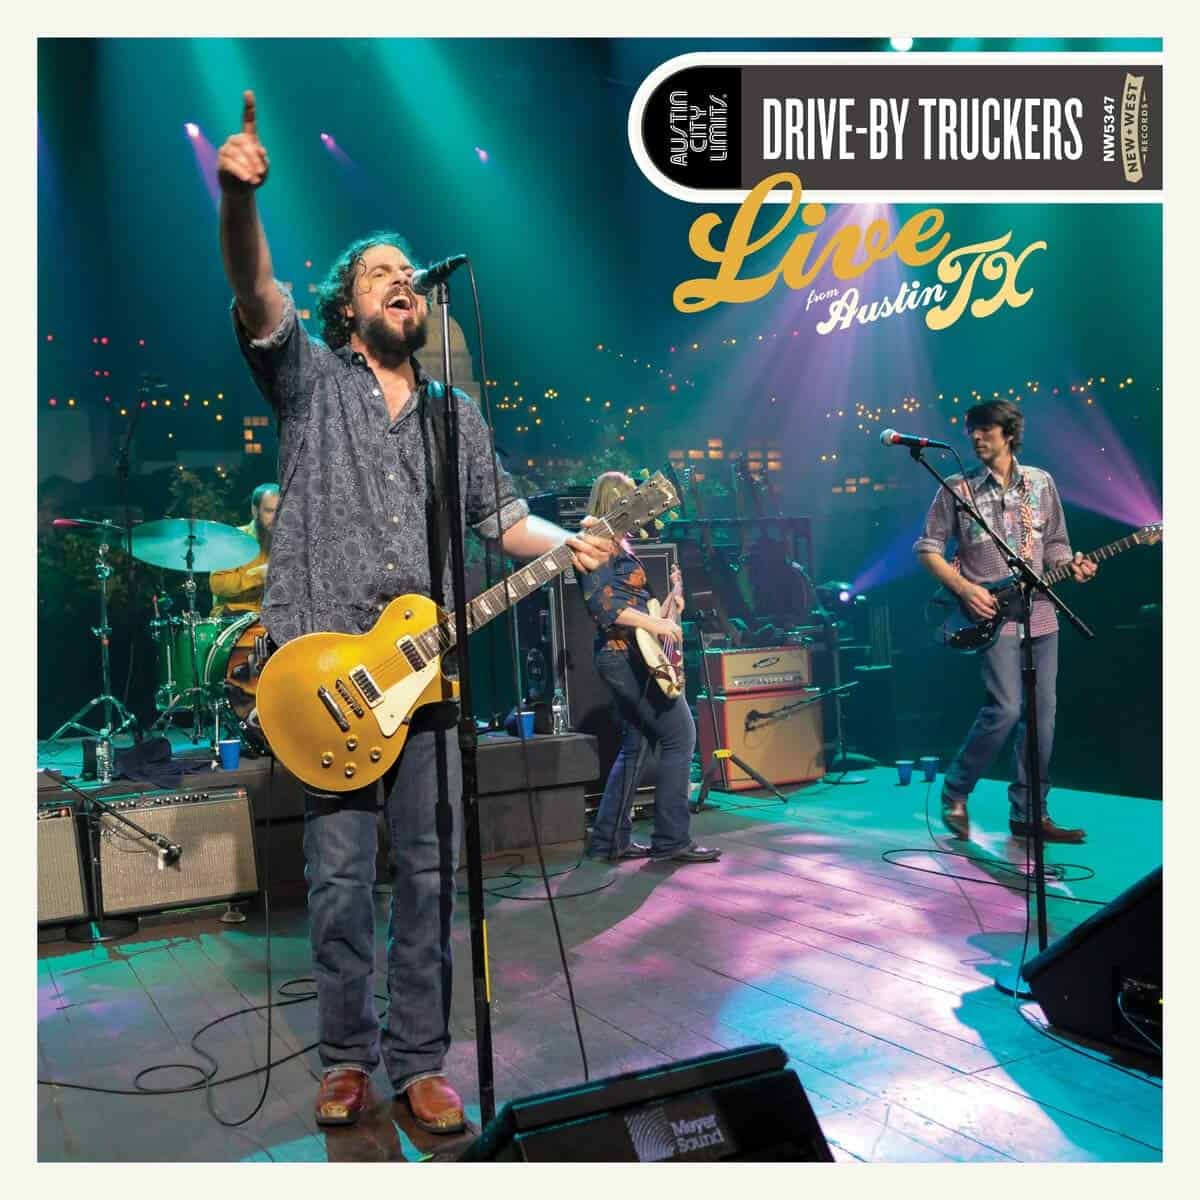 Drive-By-Truckers-Live-From-Austin-TX-vinyl-record-album-front